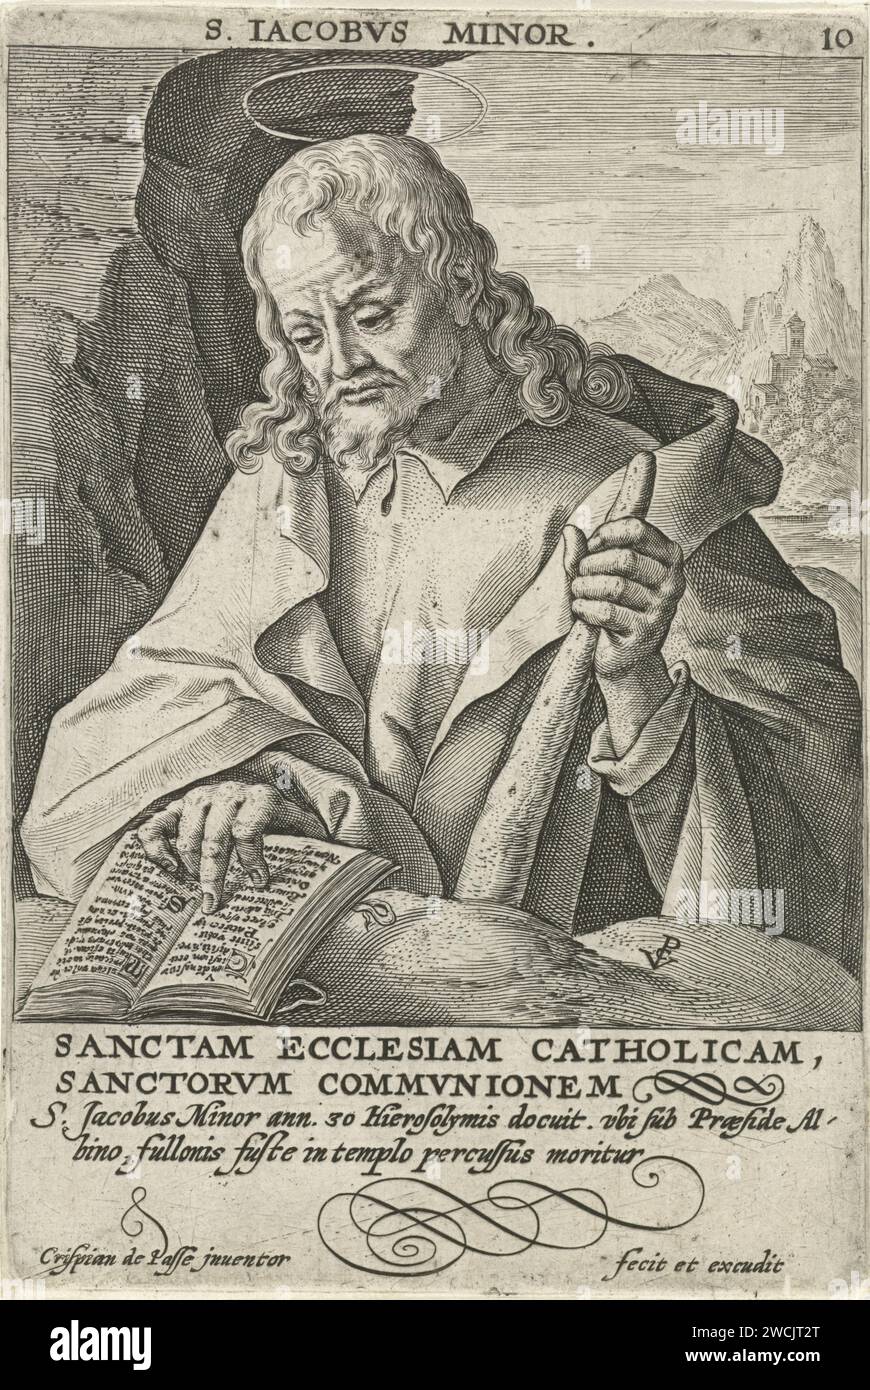 Apostle Jacket the lesser, cris pain of the passes (i), 1594 print Bust of the Apostle Jakobus De Lessere, an open book for him and with his left hand based on a bat. In the margin a caption in Latin. Print from a series with Christ and the apostles. Cologne paper engraving the apostle James the Less, first bishop of Jerusalem; possible attributes: book, fuller's club, scroll Stock Photo